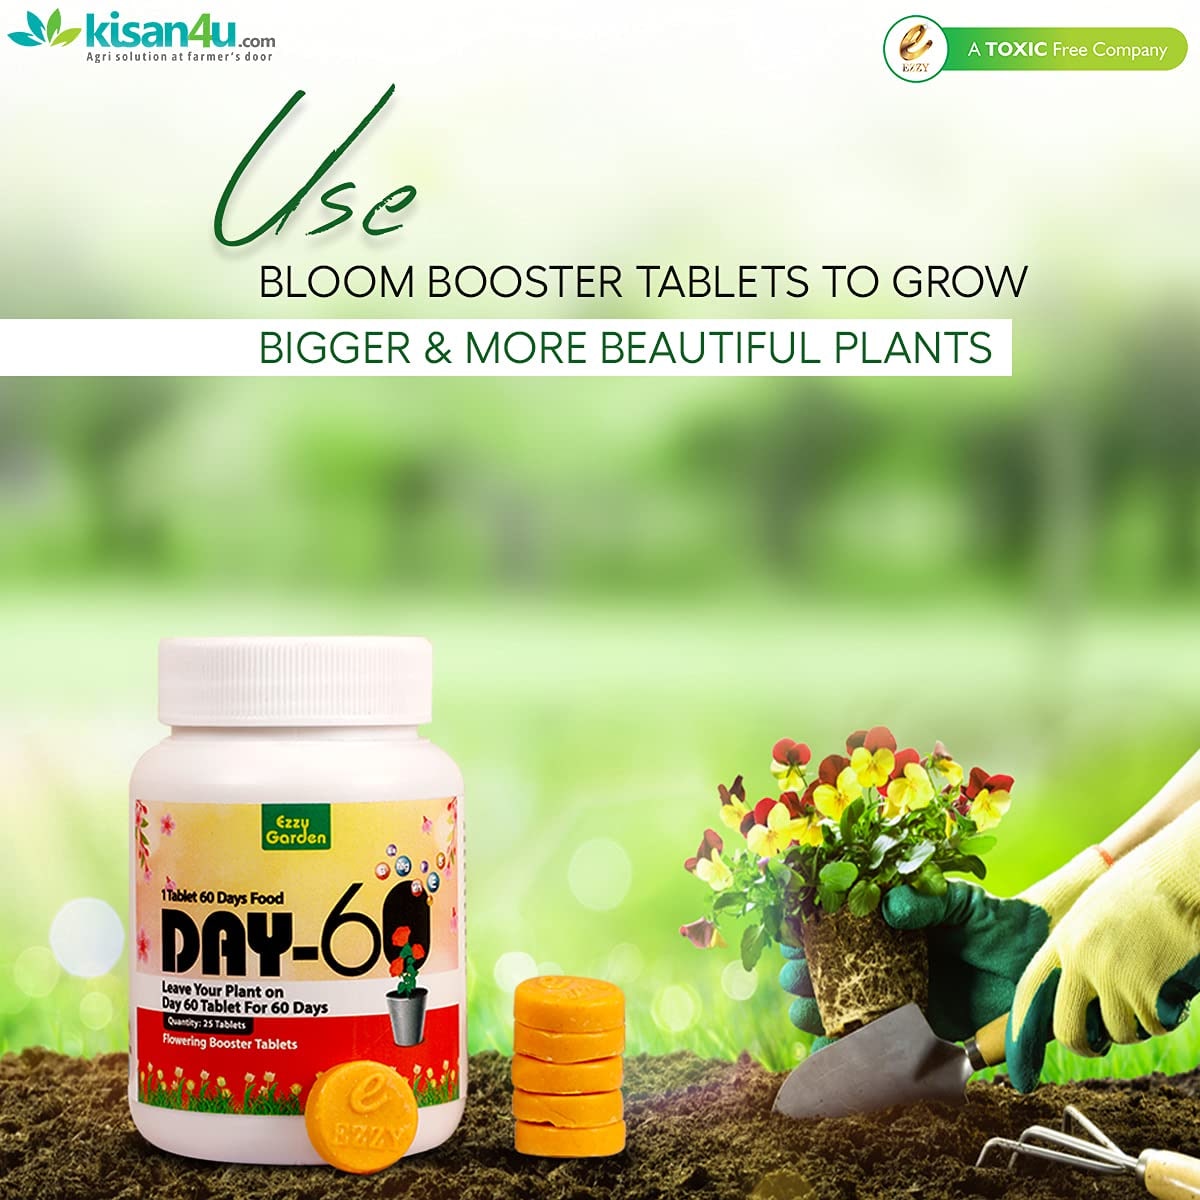 How to Use Plant Food Fertilizer Tablets